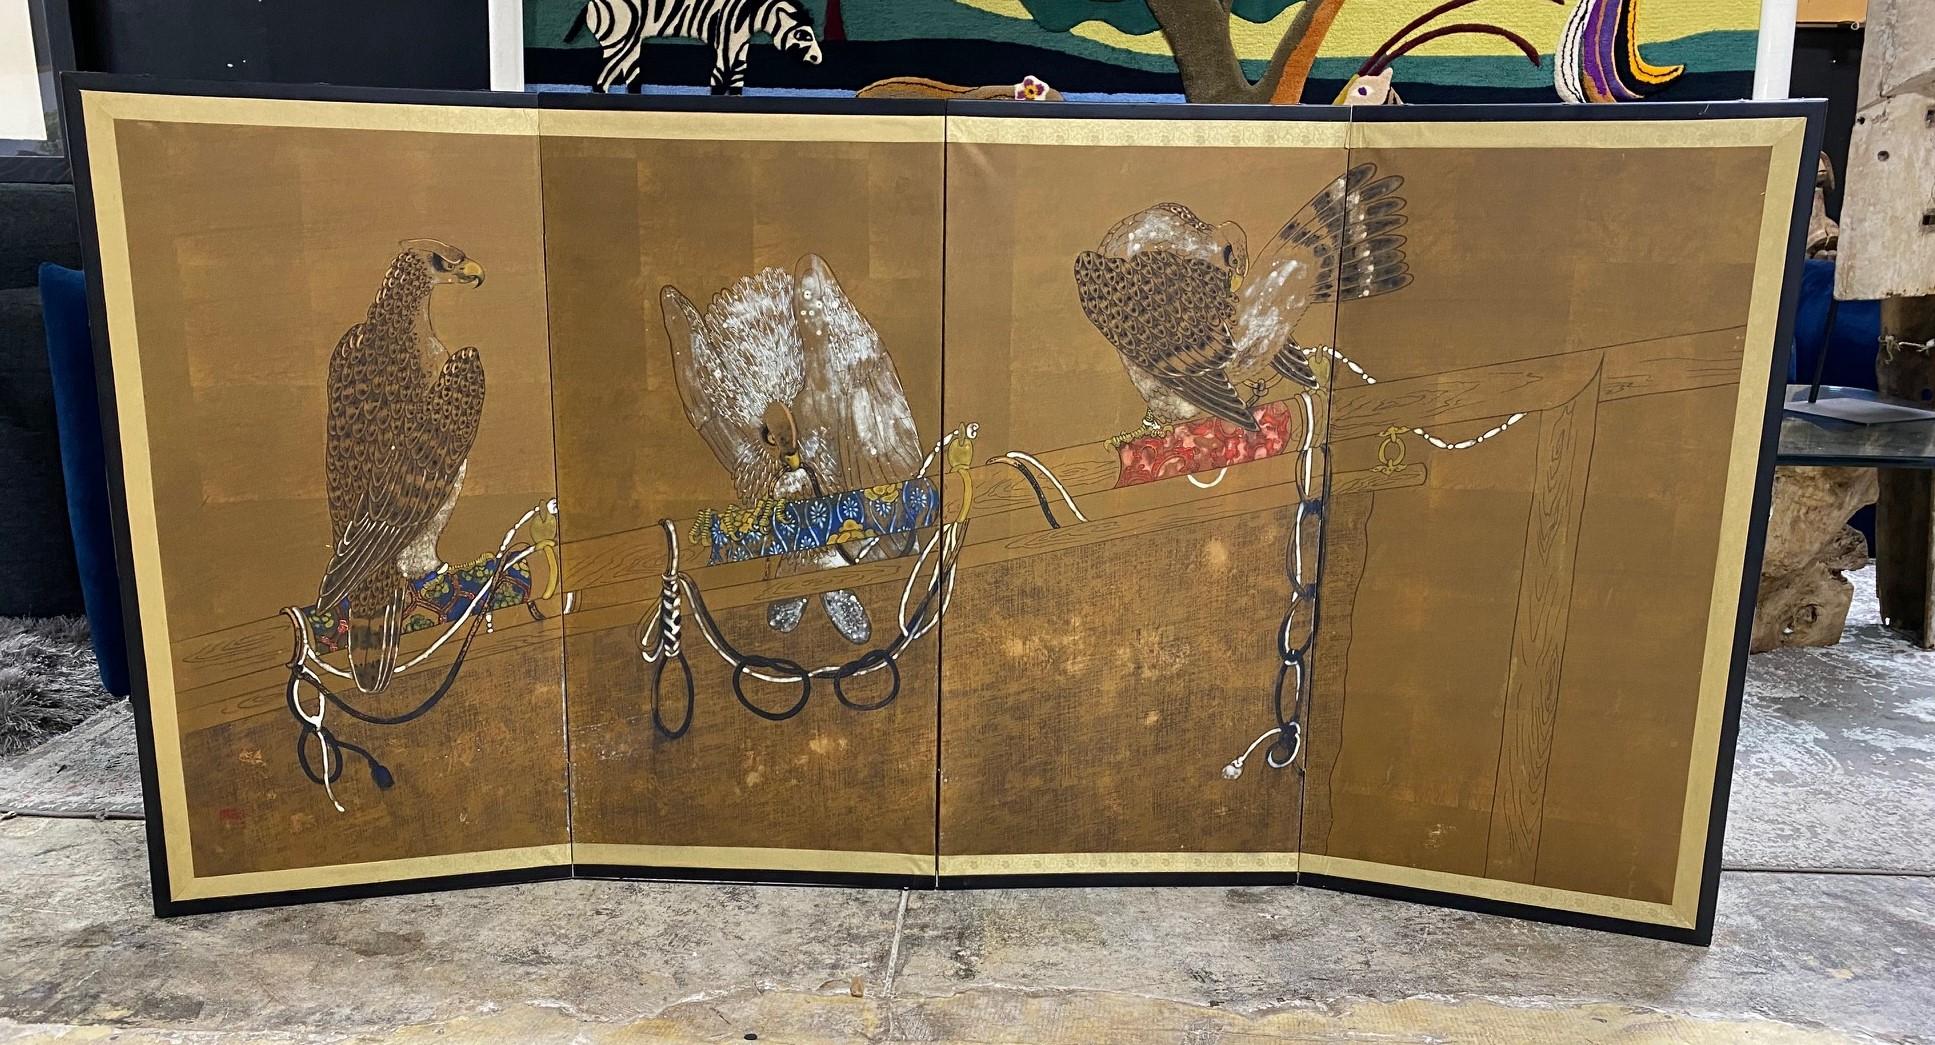 A beautiful and engaging four-panel Japanese Byobu folding screen depicting three distinct tethered and tamed hunting birds of prey - hawks or falcons (Takagari) - sitting upon their perch. The rich colors, gold leaf, and beautiful hand-painted